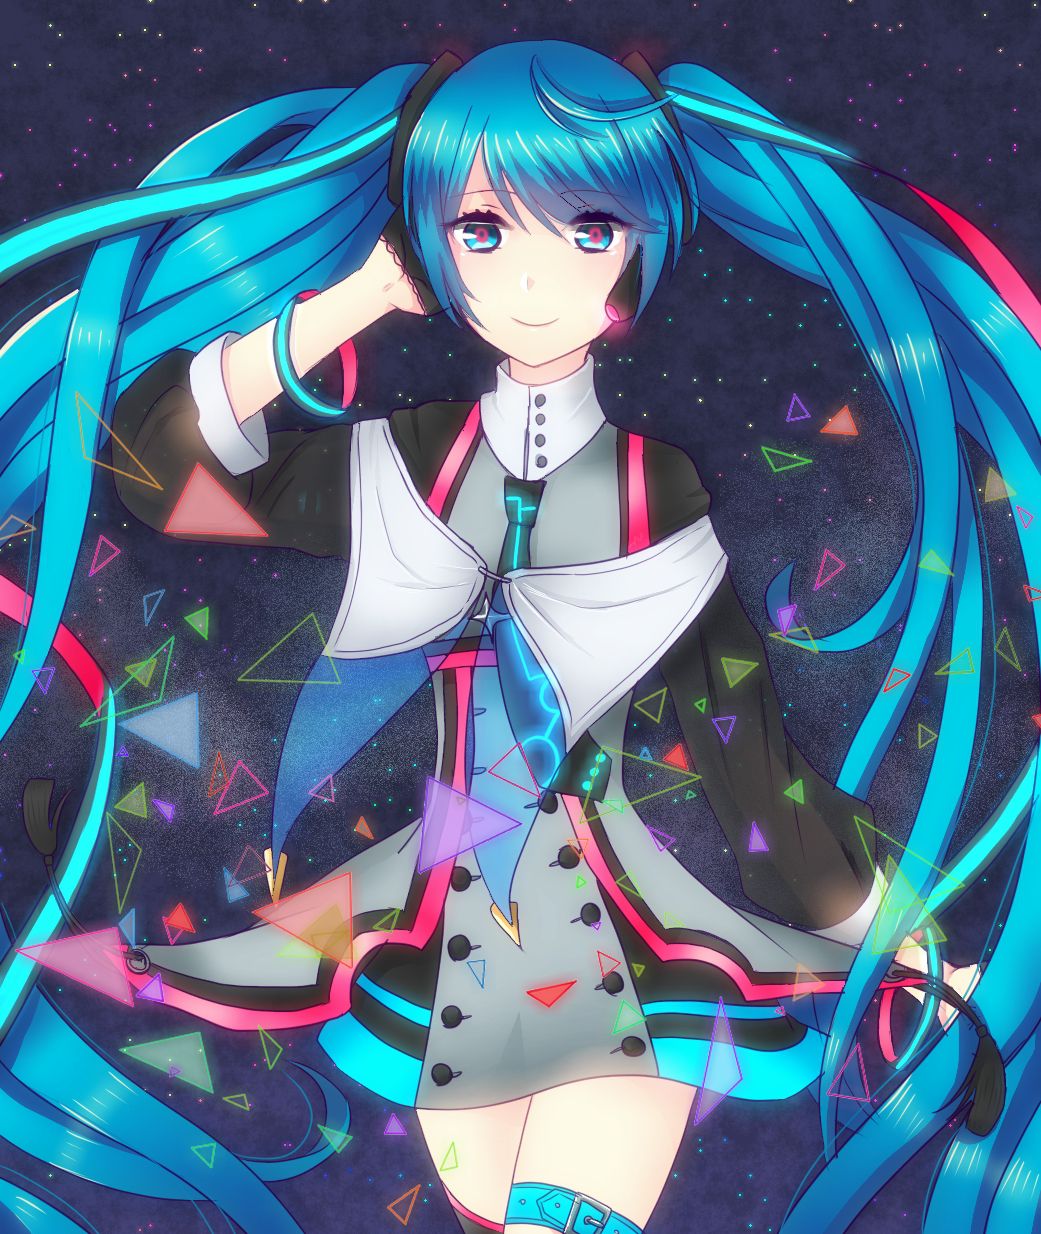 Assorted Miku images after a long absence. 17